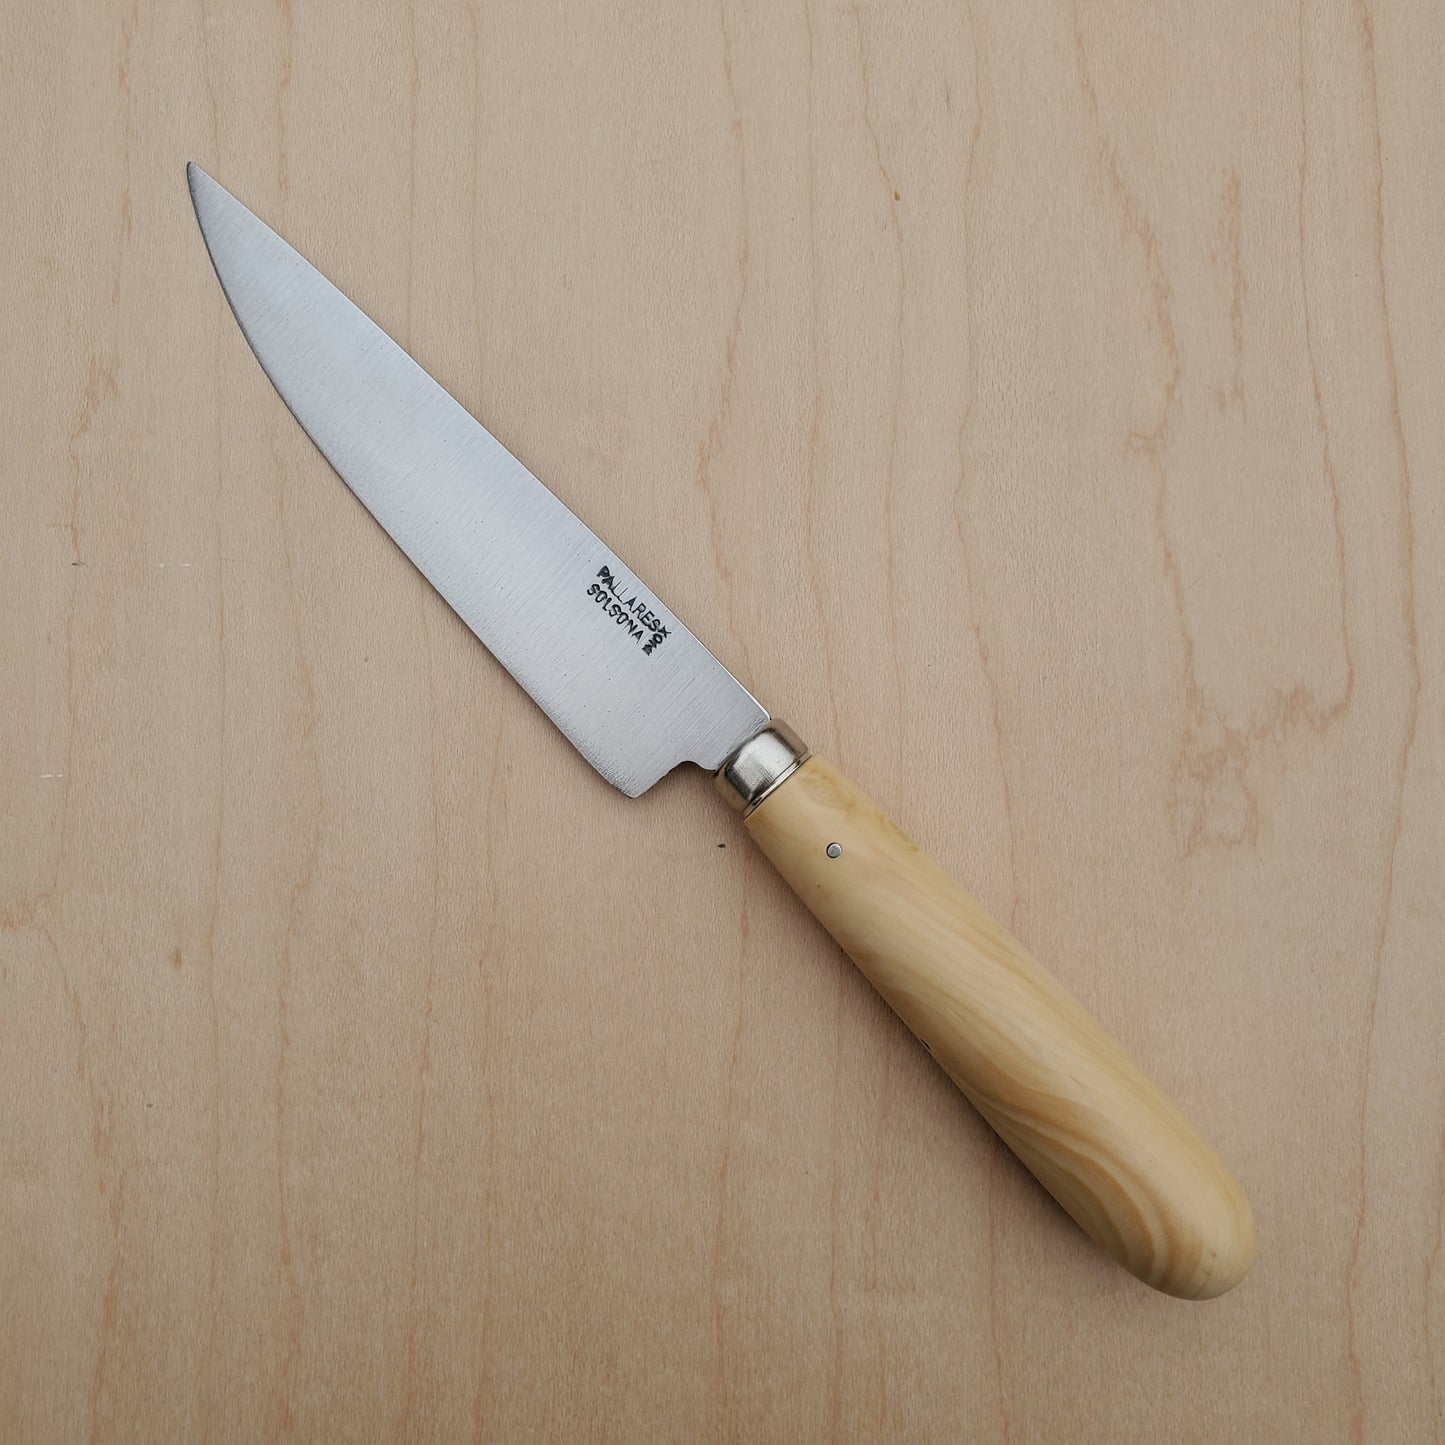 Pallares 4.75" Steak and Table Knife - Inox - Boxwood